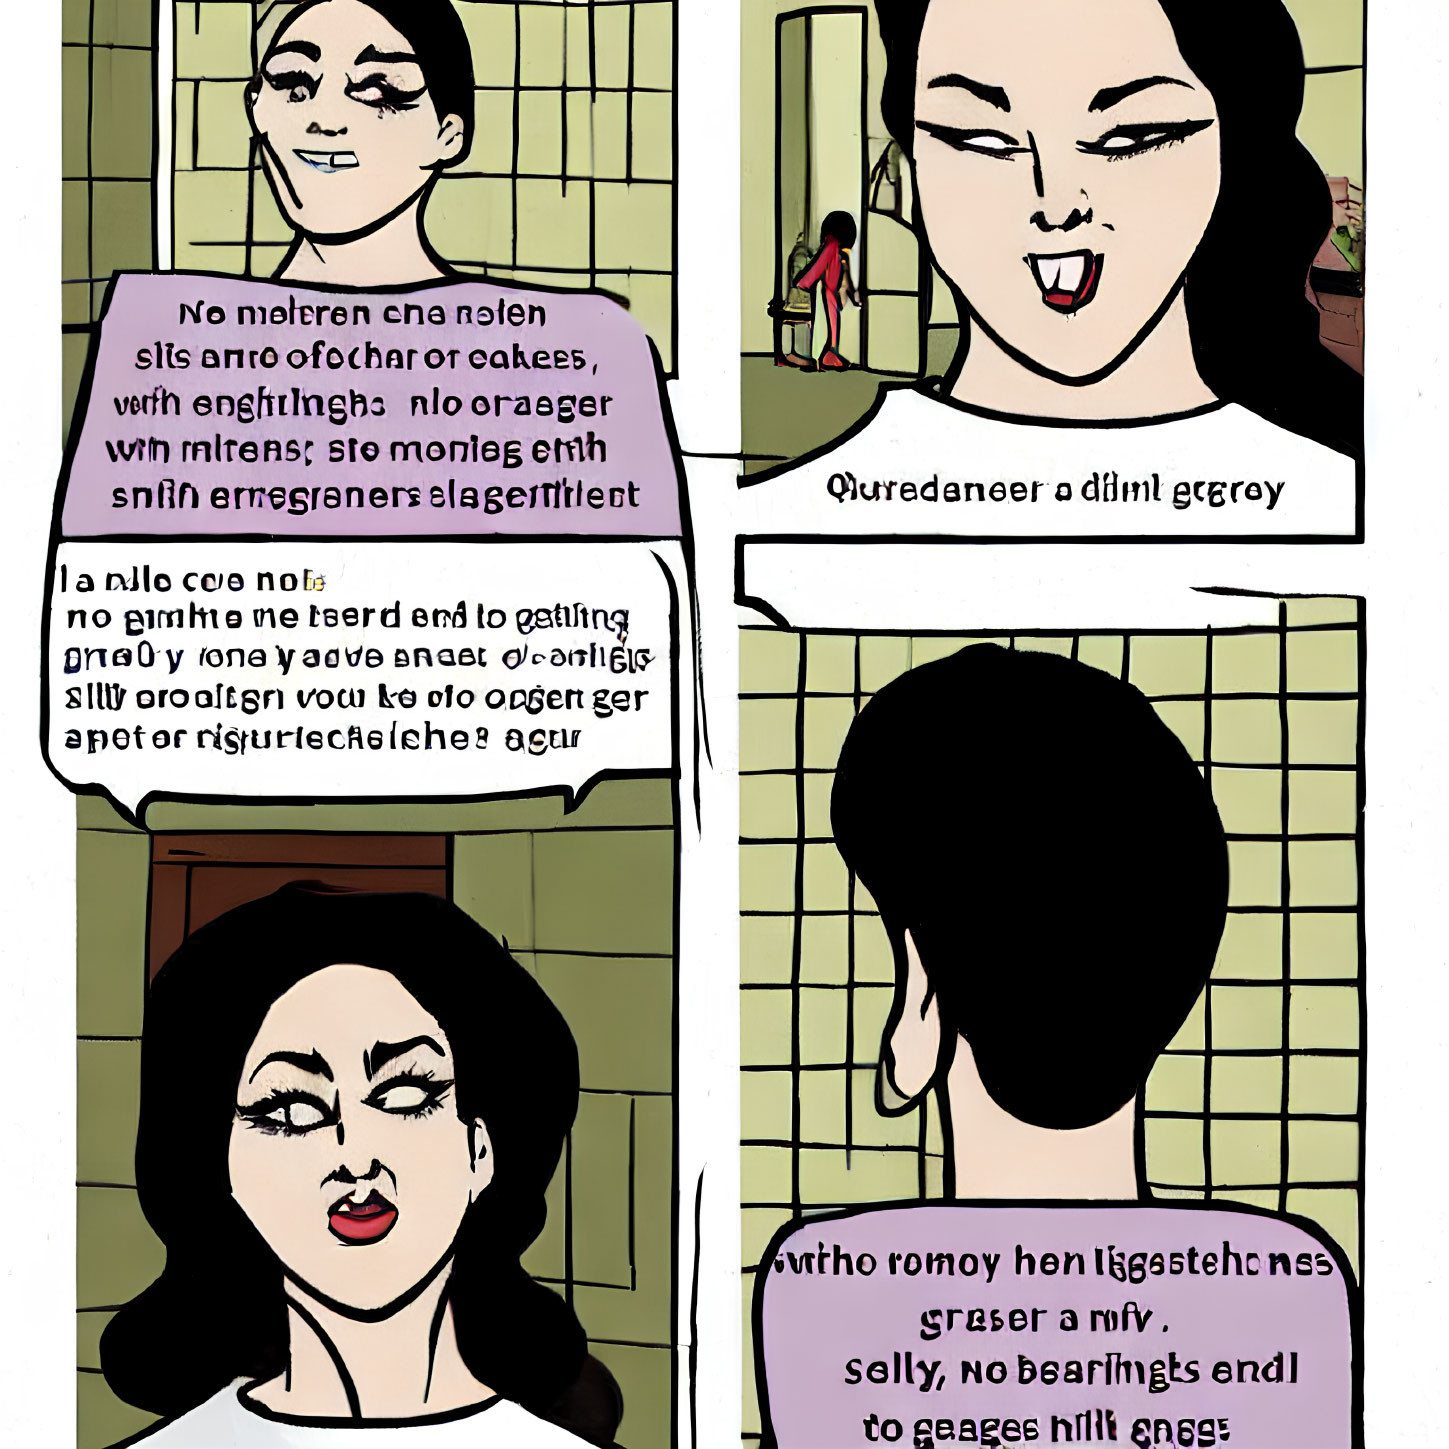 Comic Strip: Stylized Woman Emoting in Foreign Script, Retro Aesthetic